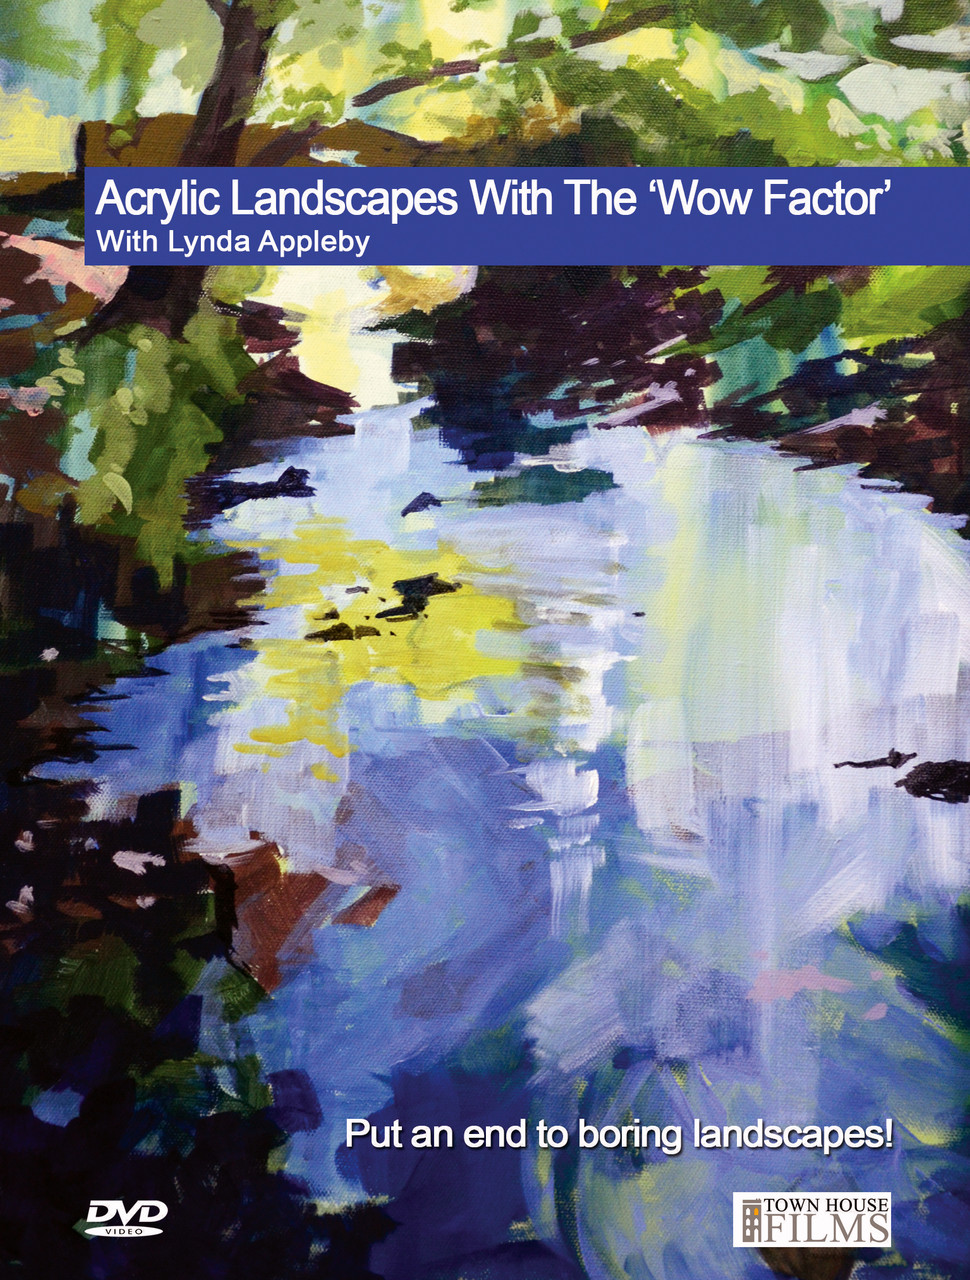 Acrylic Landscapes With The Wow Factor - With Lynda Appleby